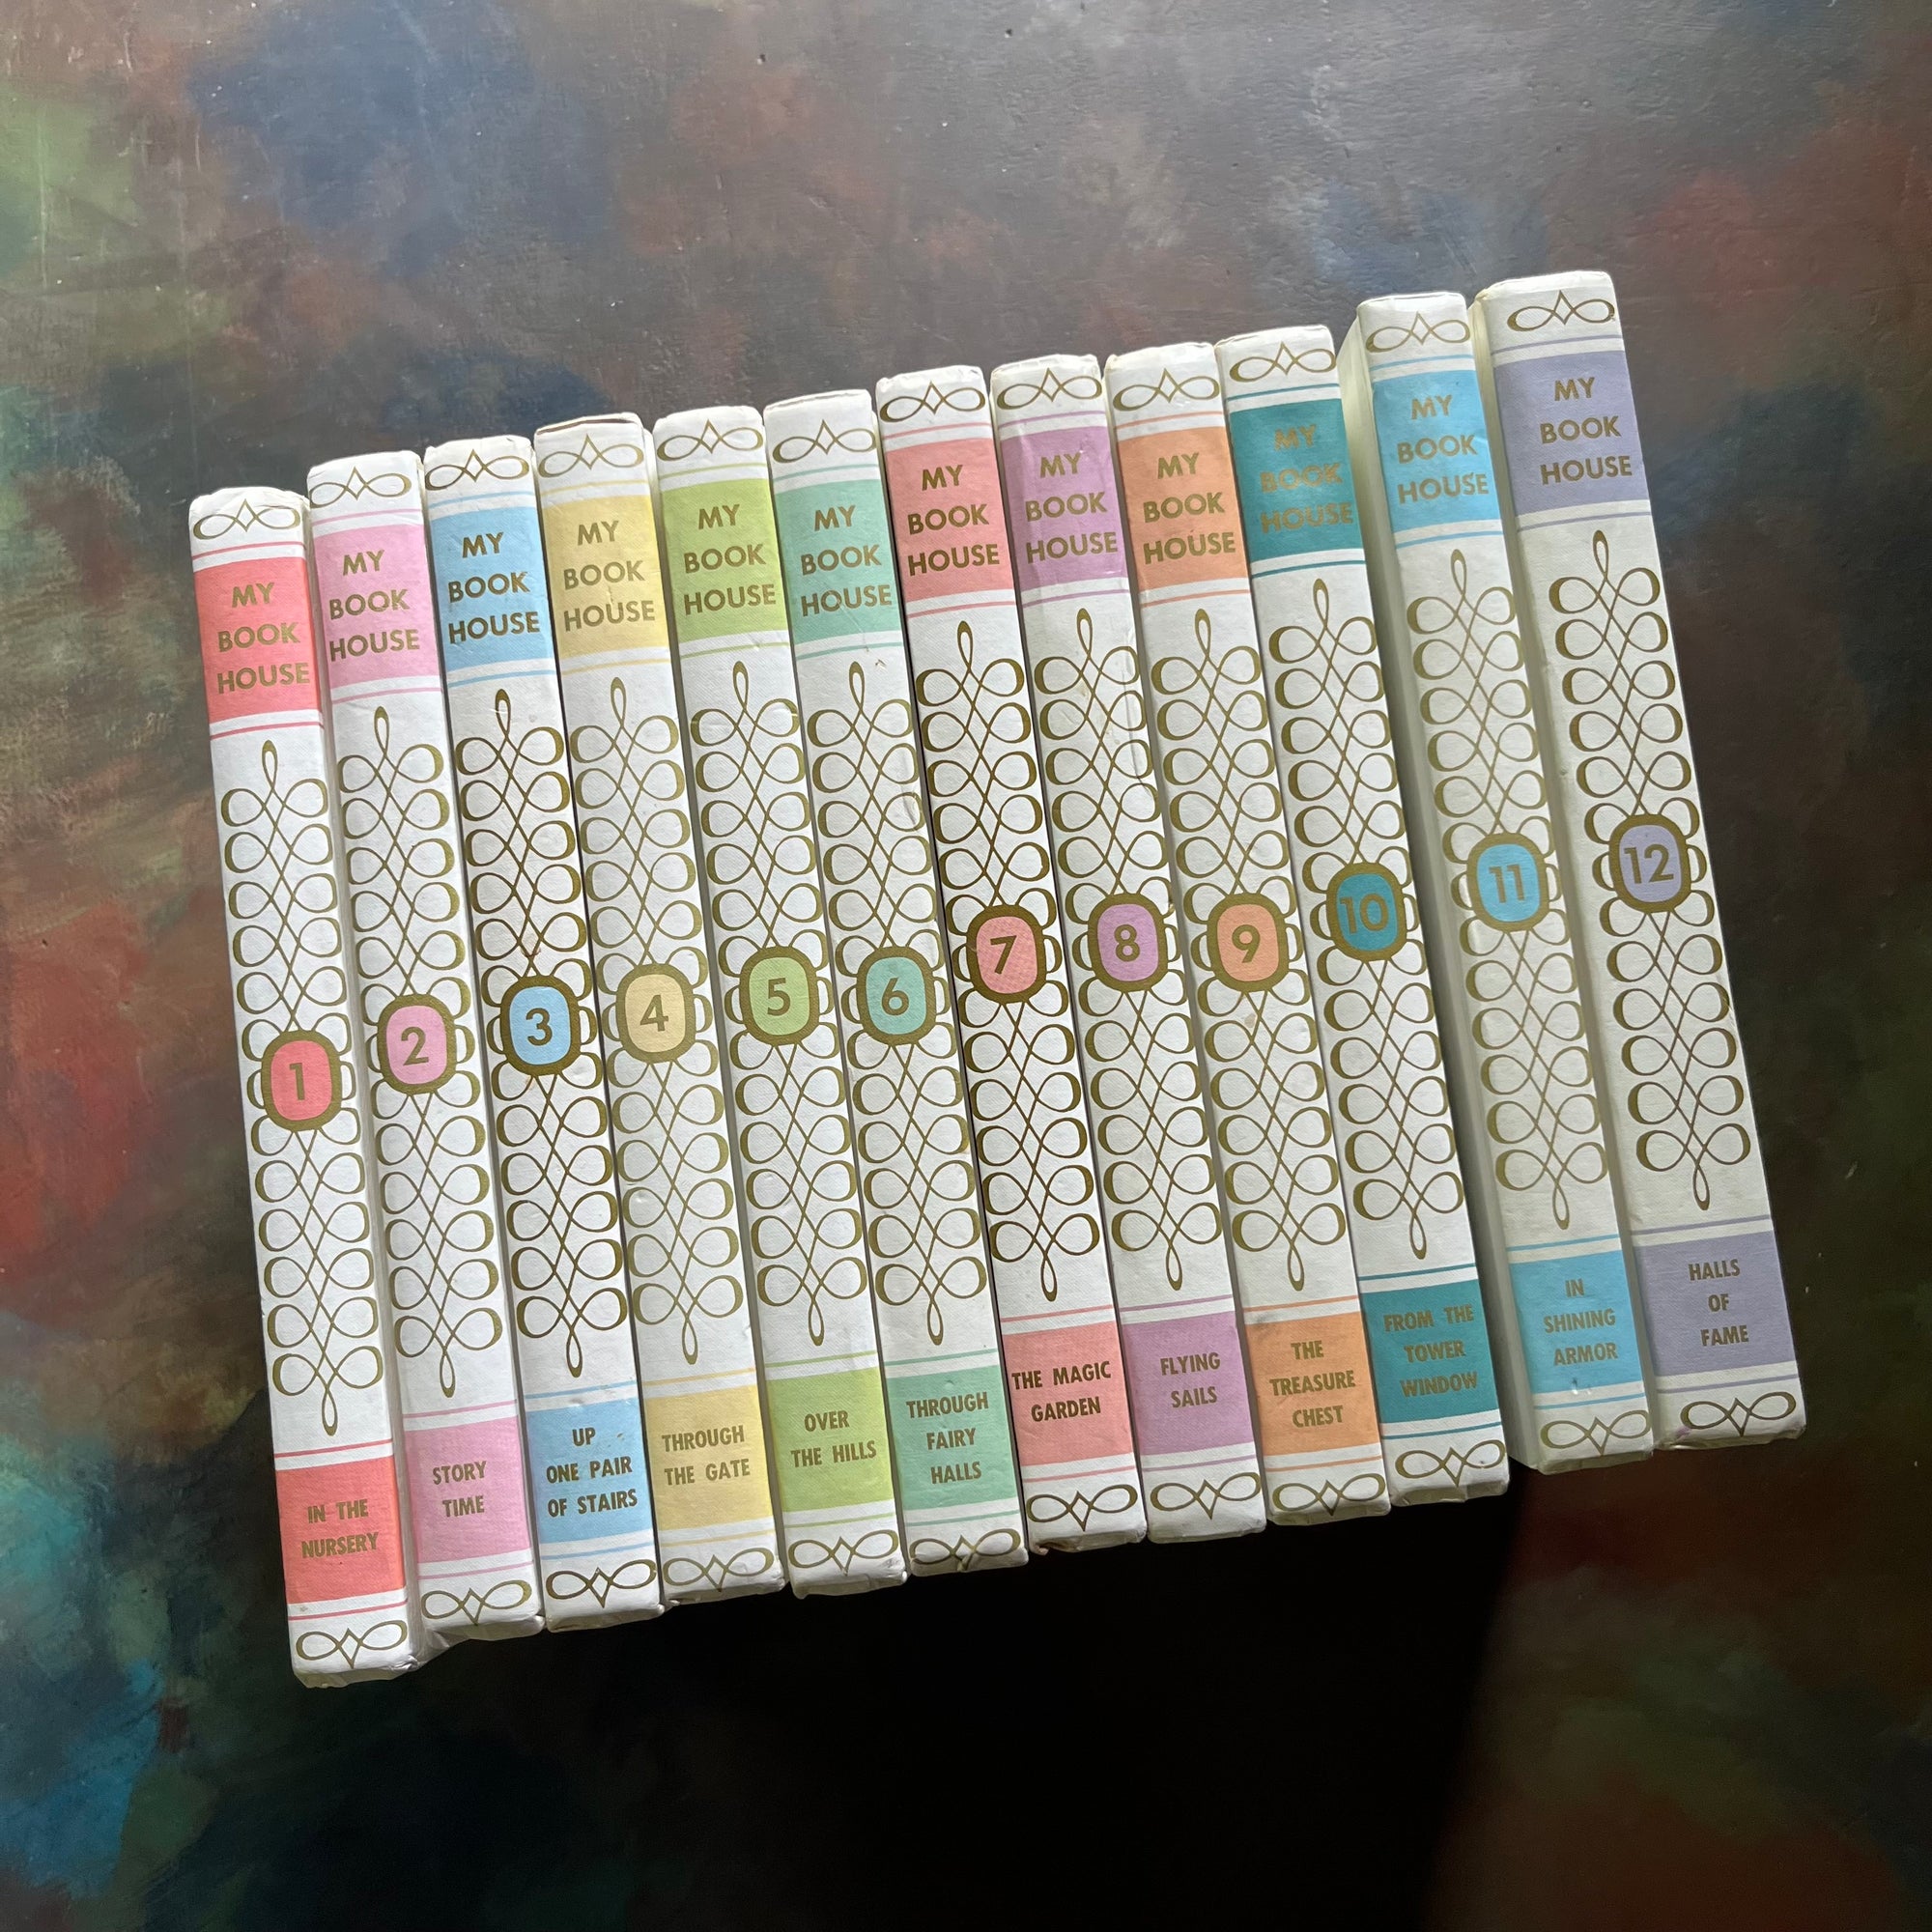 My Book House Book Set-1971-compete 12 volume set-Oilive Beaupre Miller-vintage children's storybook set-view of the pastel & white spines